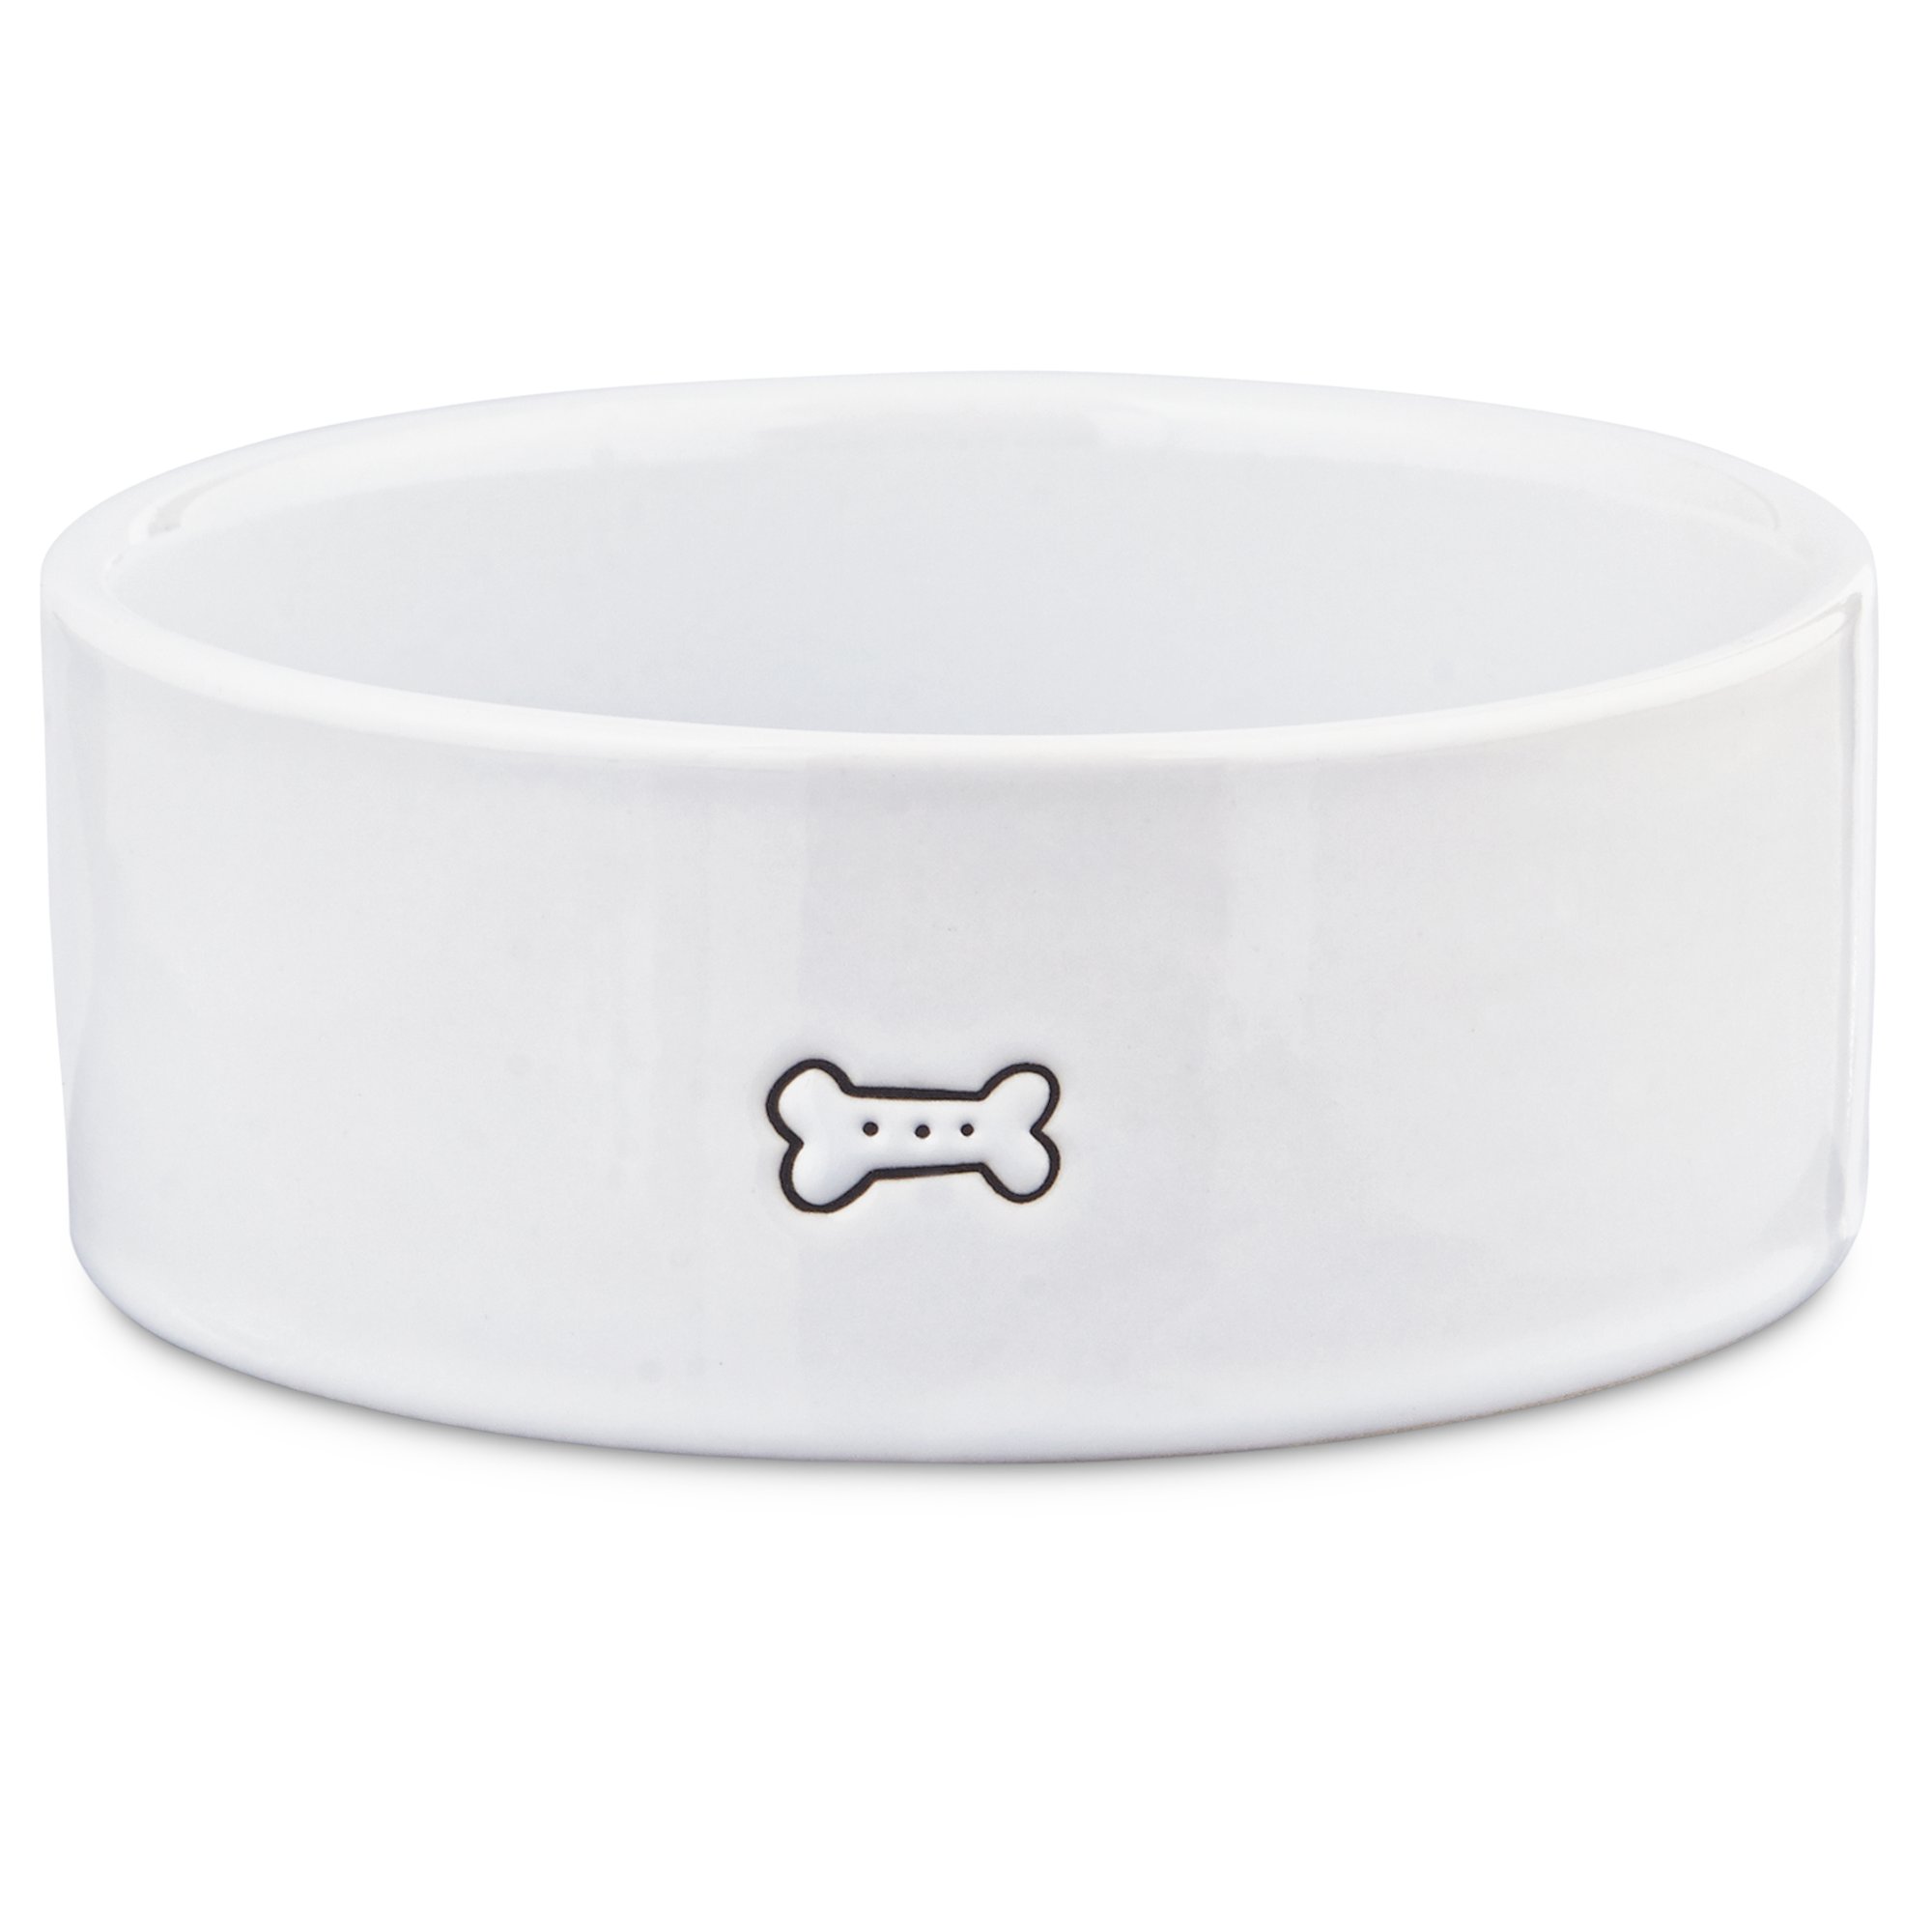 ceramic feeding and water bowls easy clean